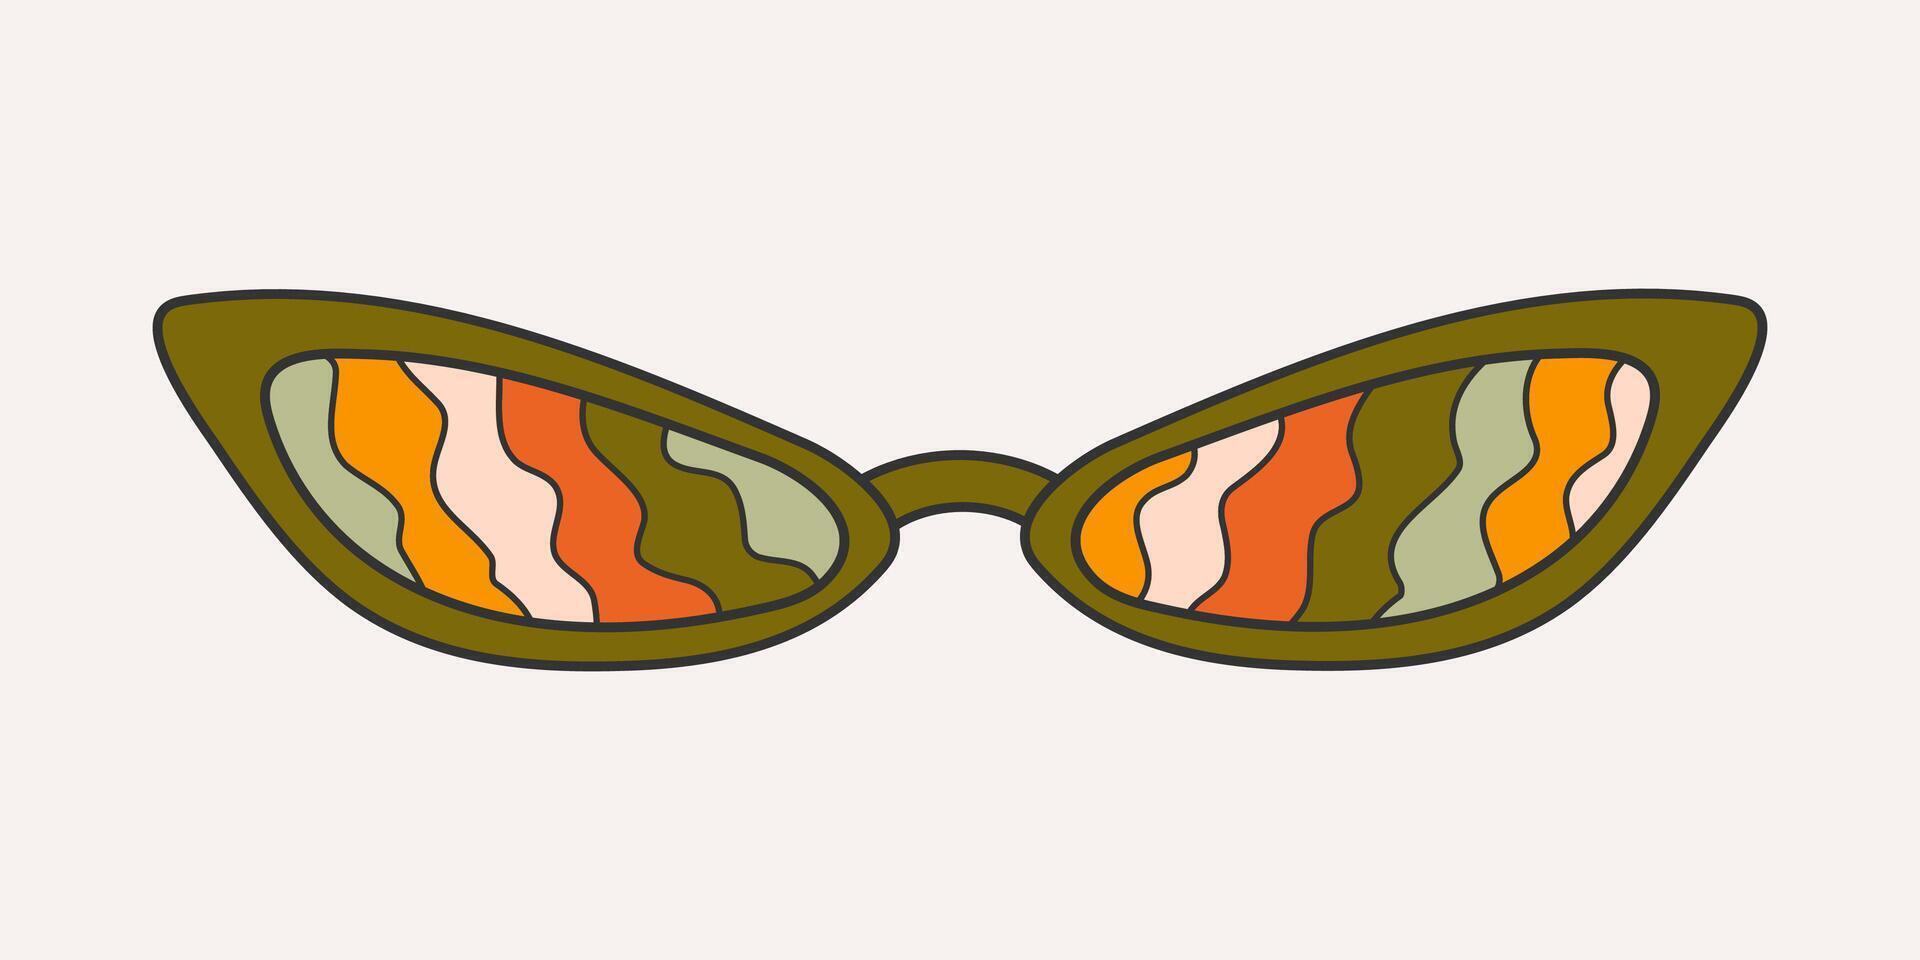 Fashionable sunglasses in groove style, carton. Retro accessory on a light background, hippie, 1970s. Various trippy patterns in glasses, waves. vector